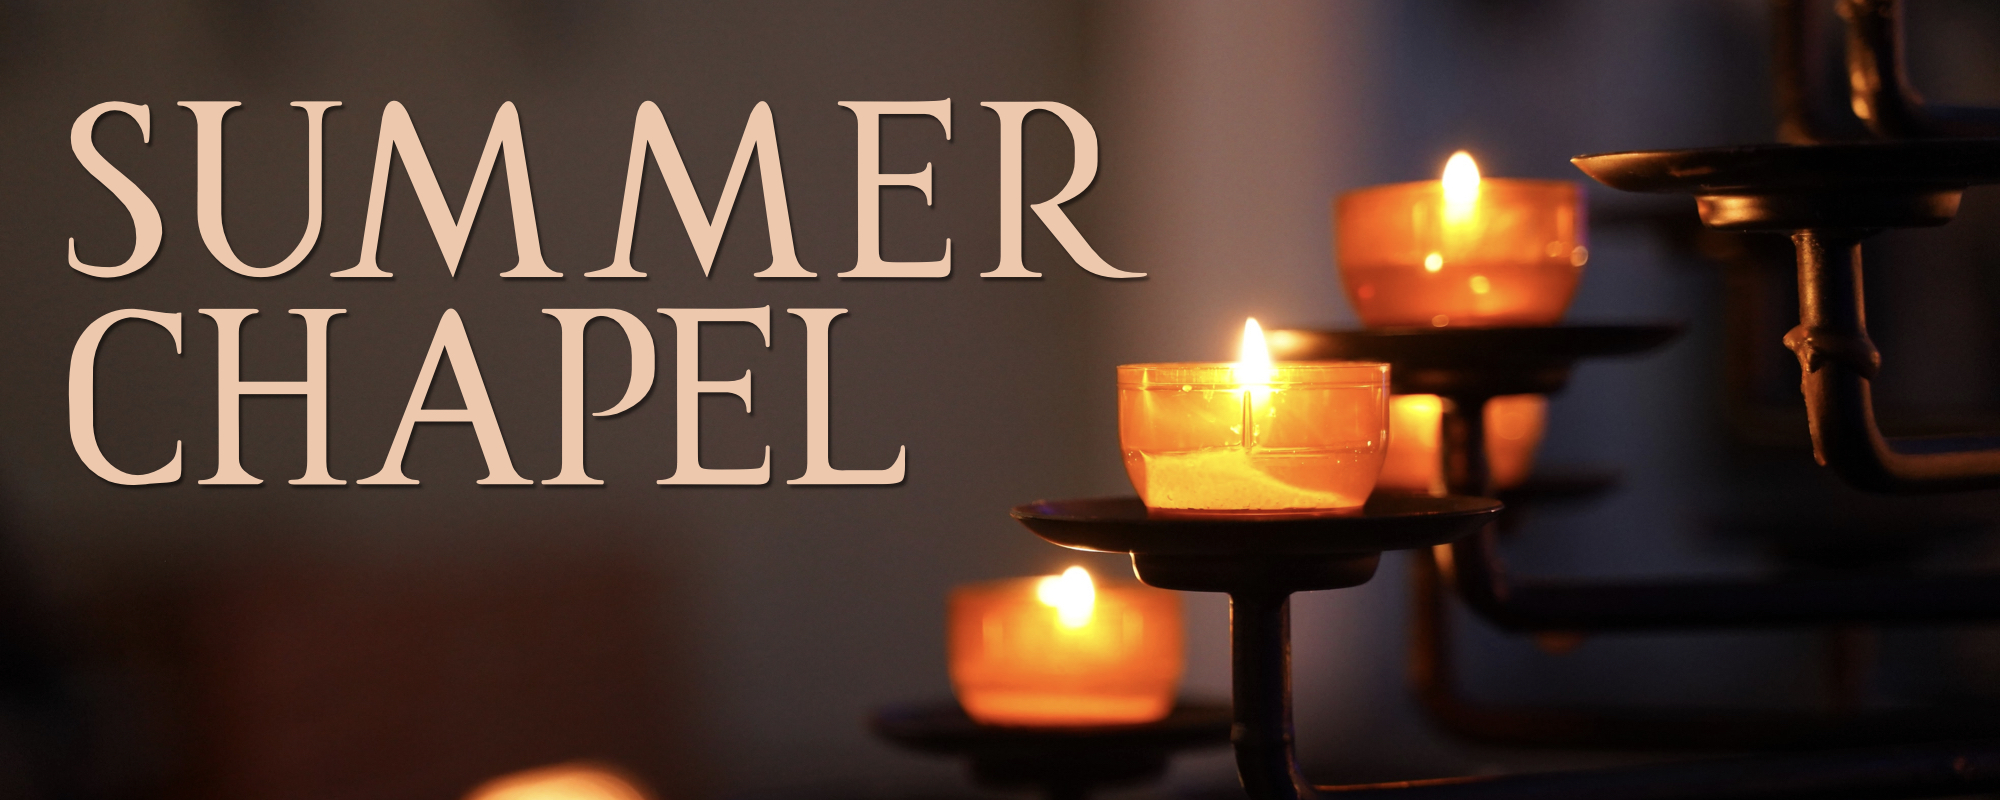 Summer Chapel Order of Worship for July 9th